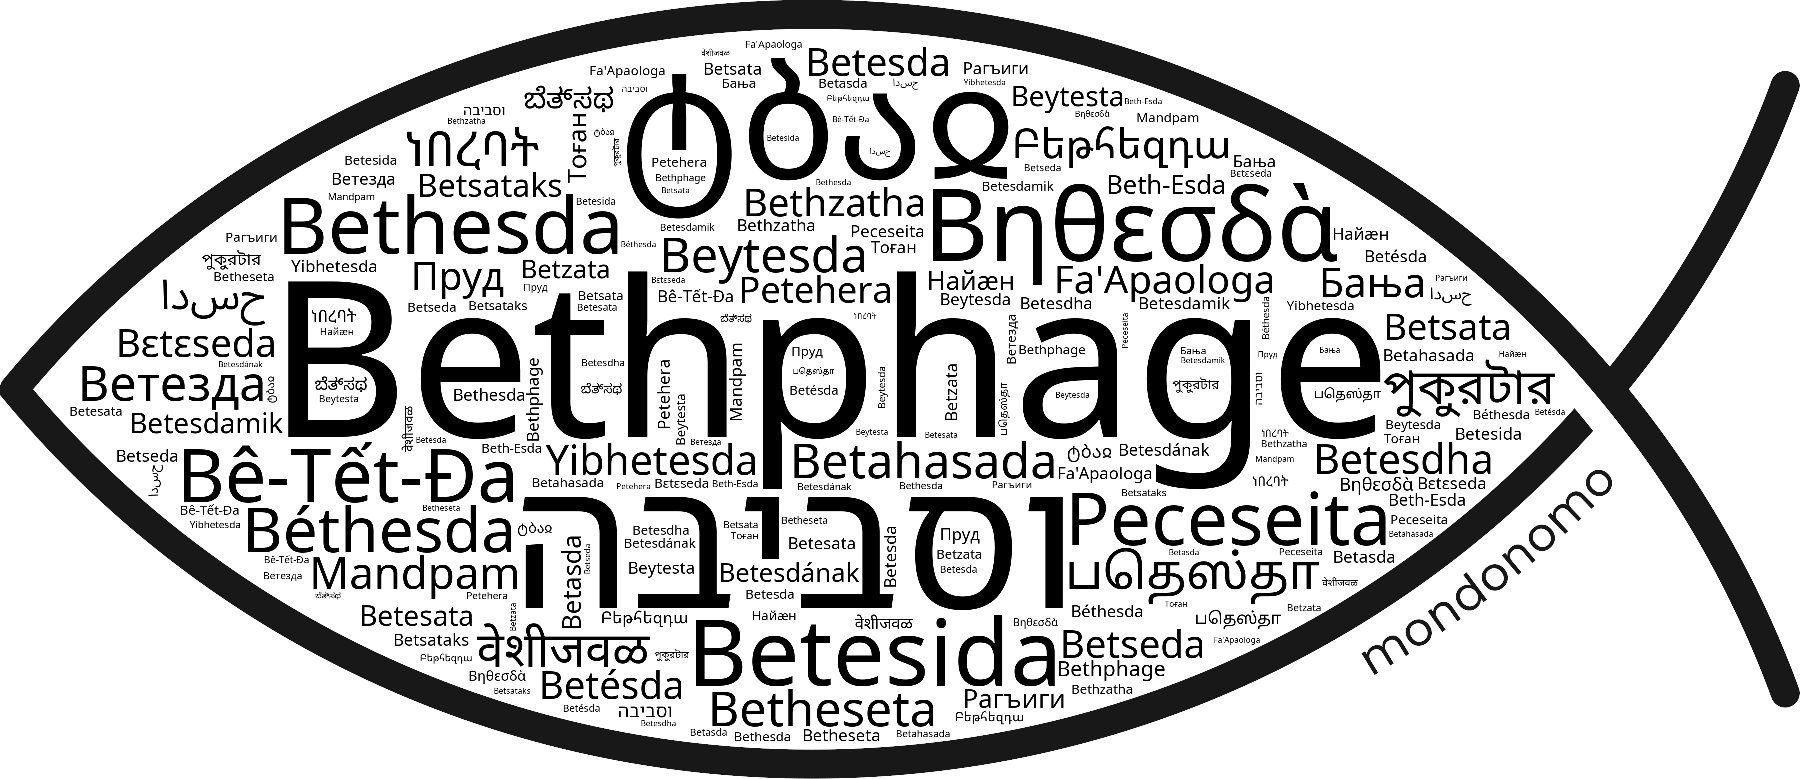 Name Bethphage in the world's Bibles